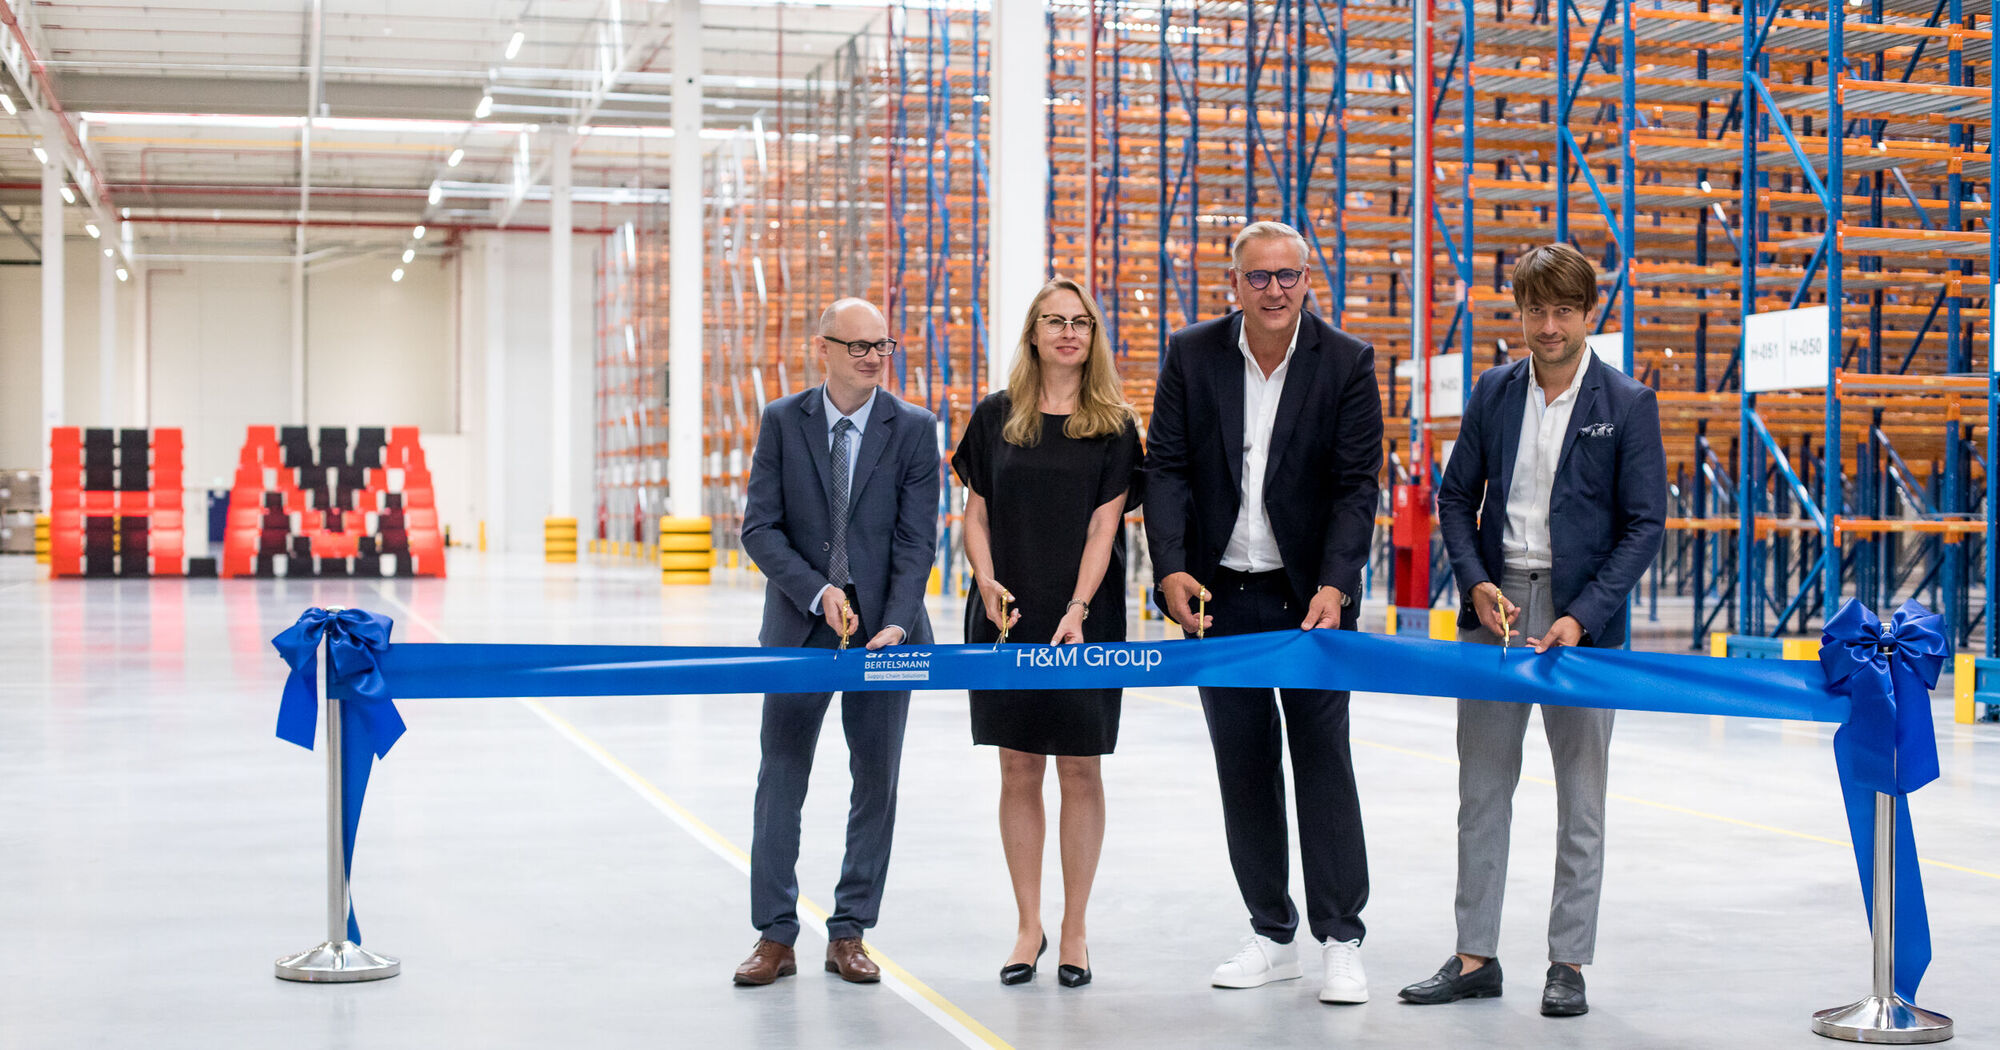 Opening of expanded distribution center in Poland with H&M Group – Arvato